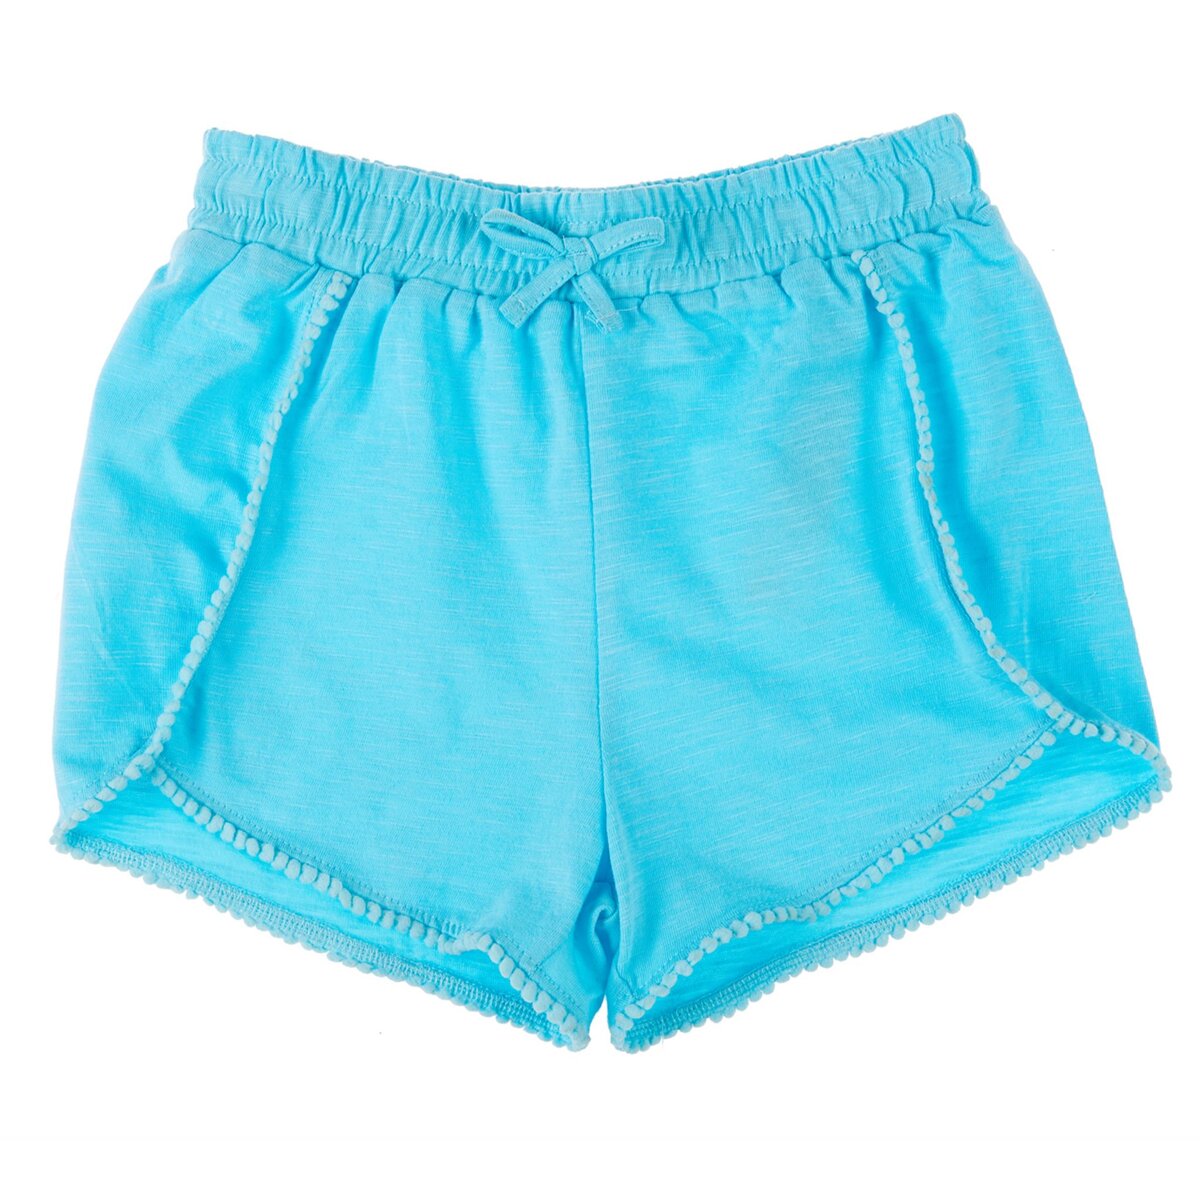 IN EXTENSO Short fille